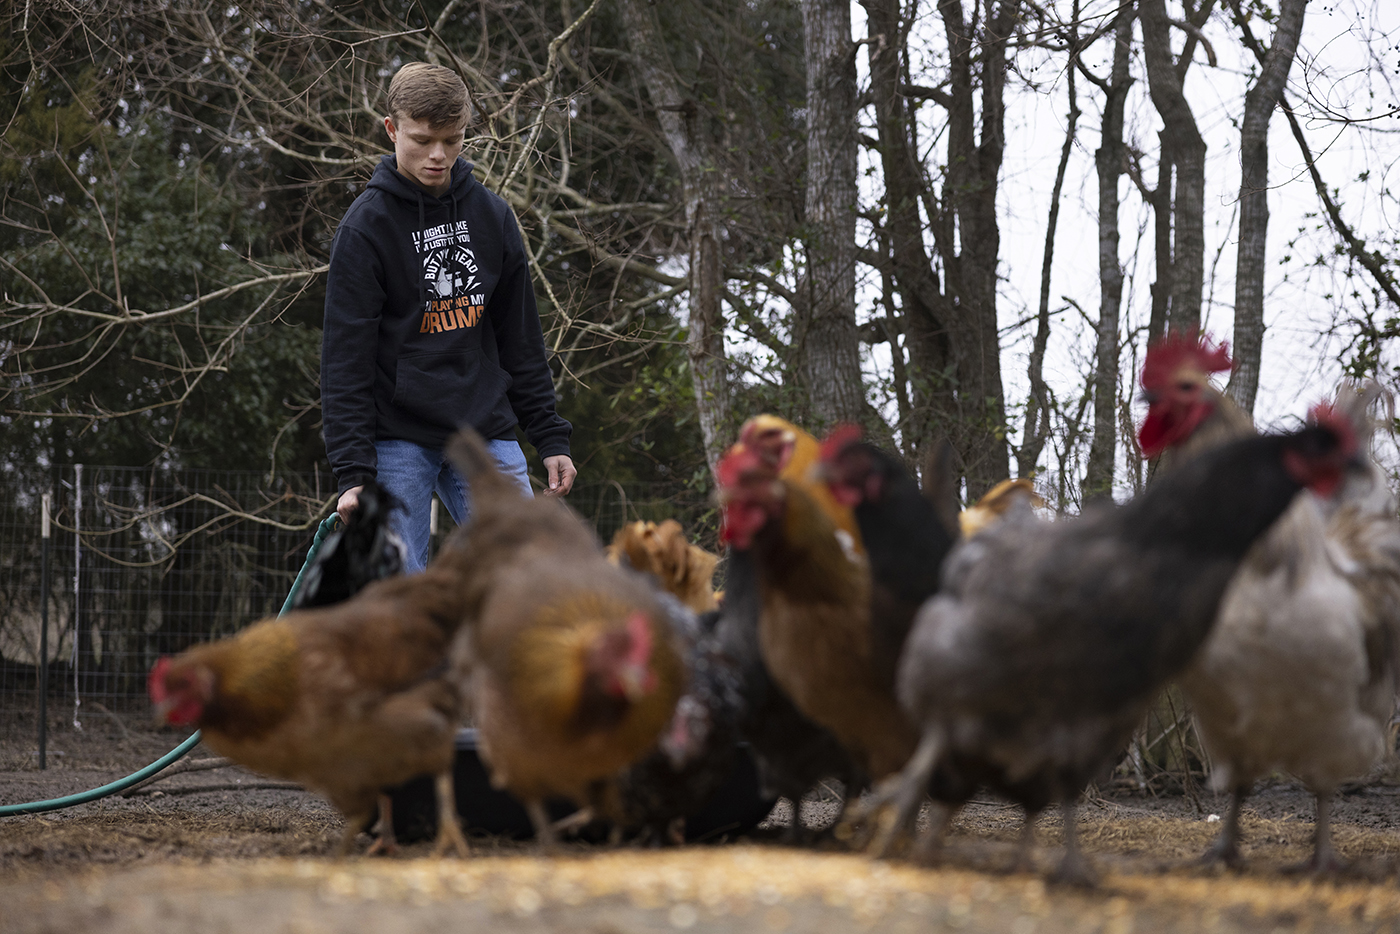 Nicholas Clements, 16, one of five siblings responsible for running Clements Family Farm in Santa Fe, feeds his family’s chickens.